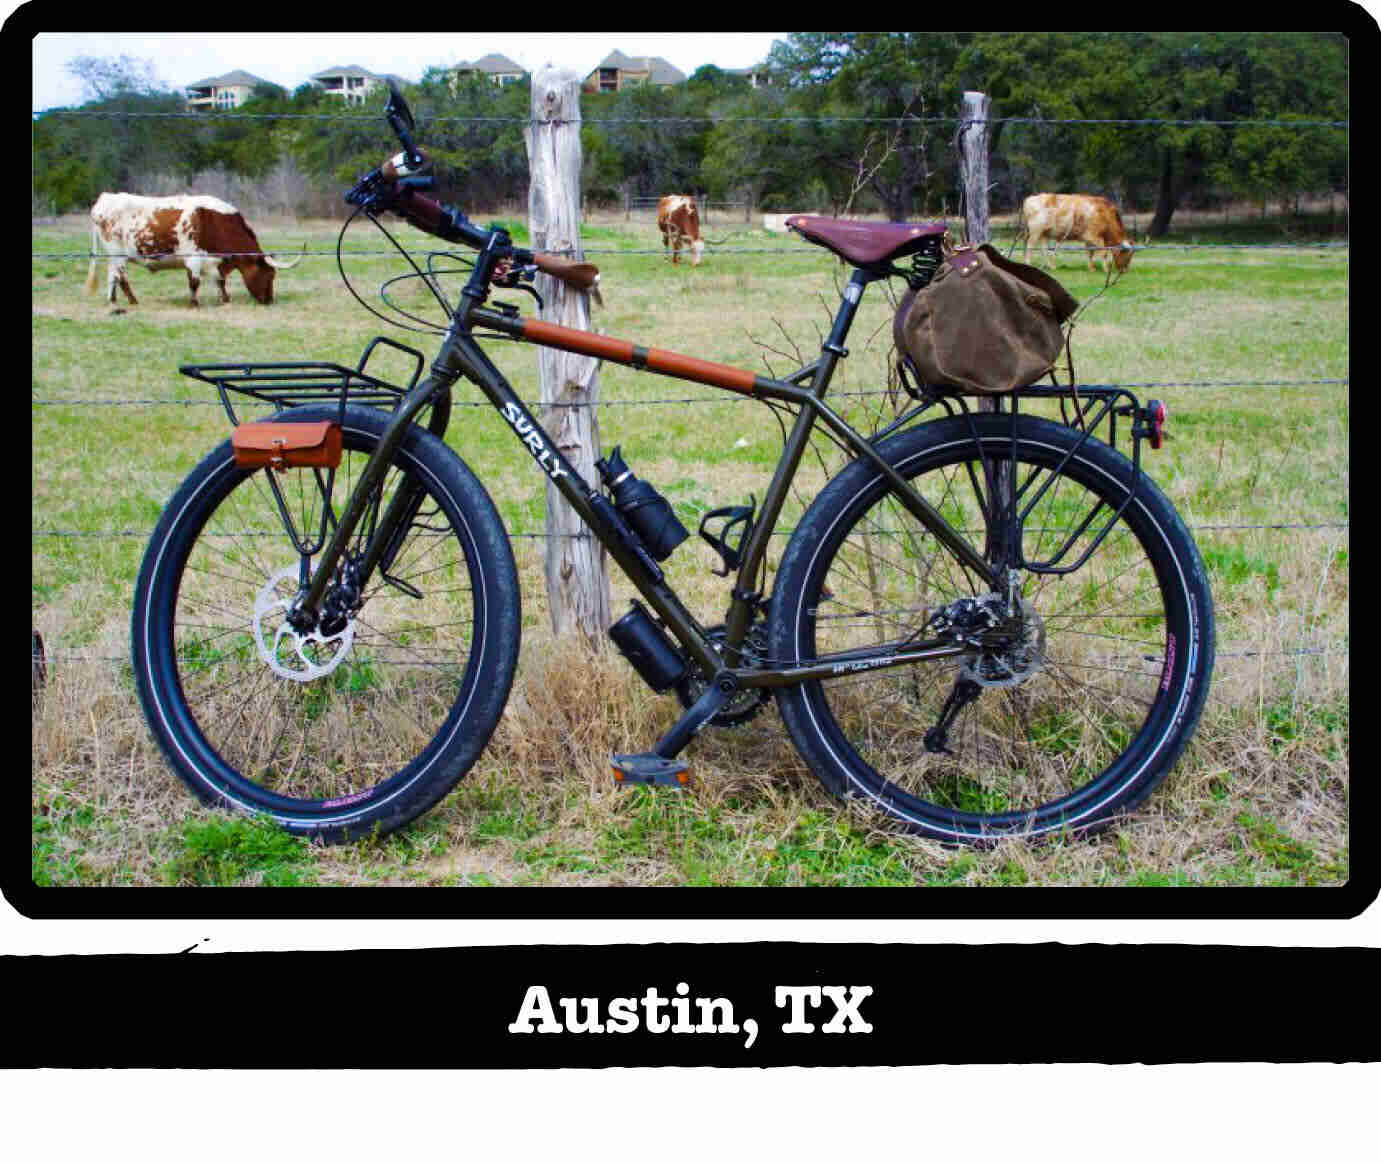 Left view of a Surly ECR bike, olive drab, against a fence with longhorns on a pasture - Austin, TX tag below image